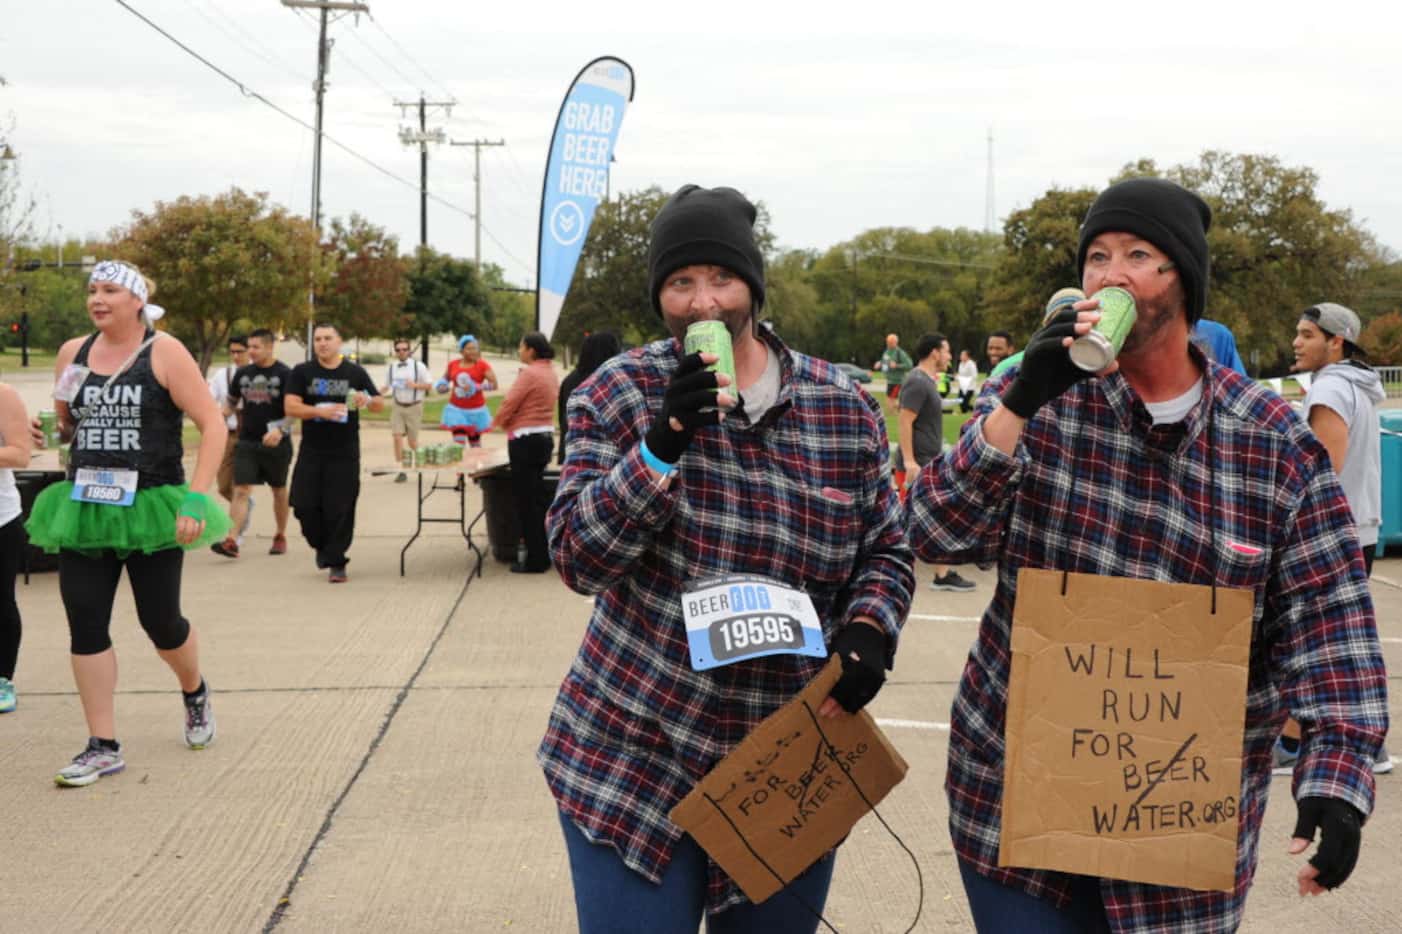 Runners will race for beer at the Brew Mile beer run in Arlington, TX on November 14, 2015....